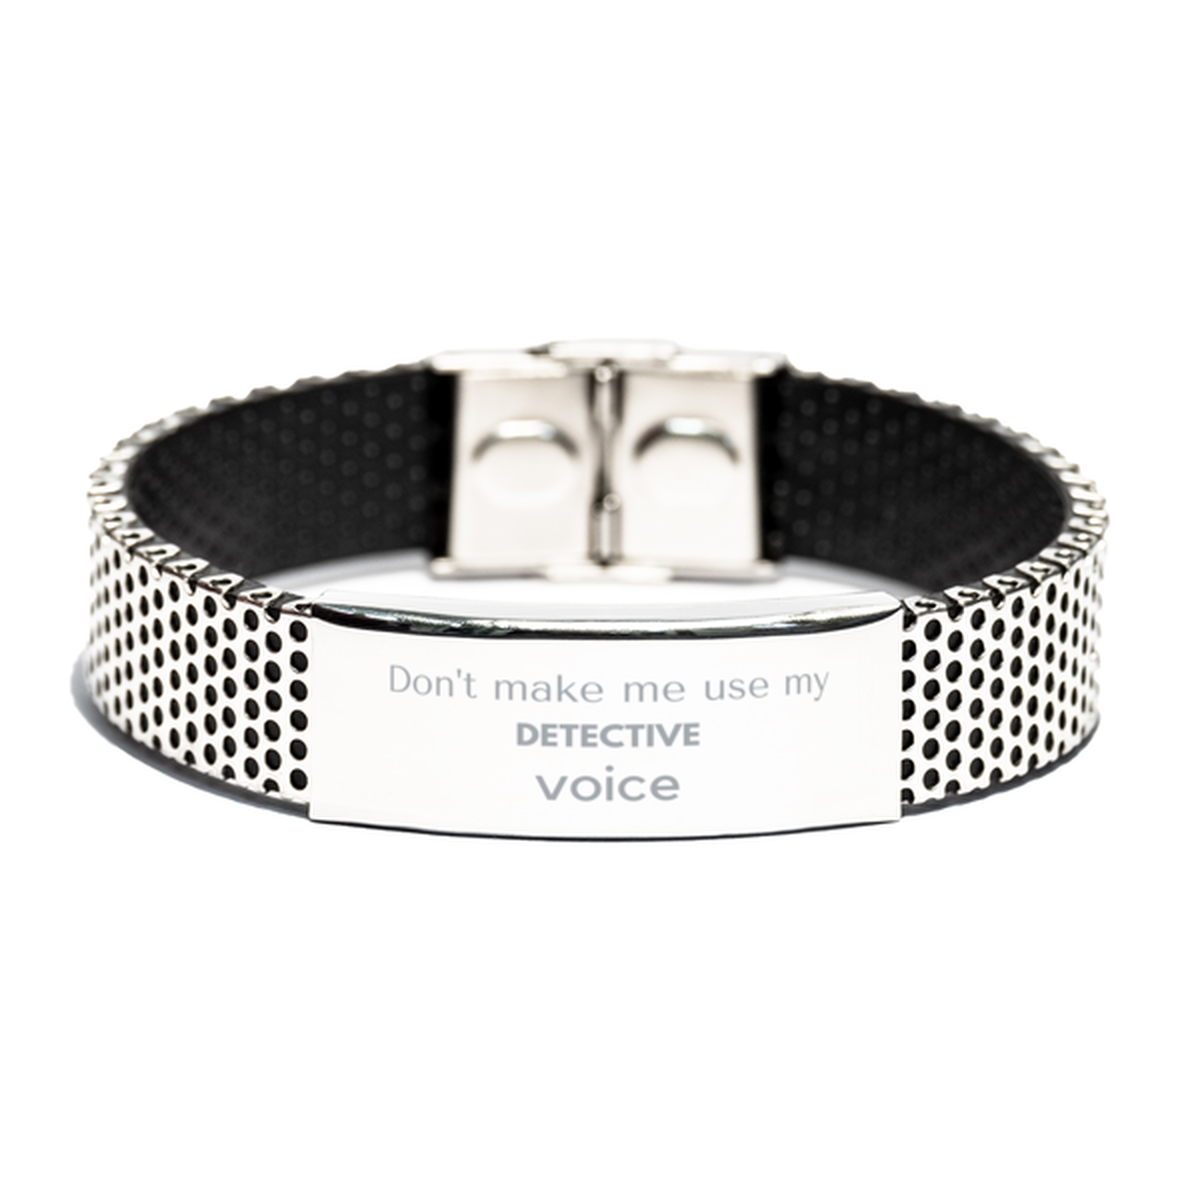 Don't make me use my Detective voice, Sarcasm Detective Gifts, Christmas Detective Stainless Steel Bracelet Birthday Unique Gifts For Detective Coworkers, Men, Women, Colleague, Friends